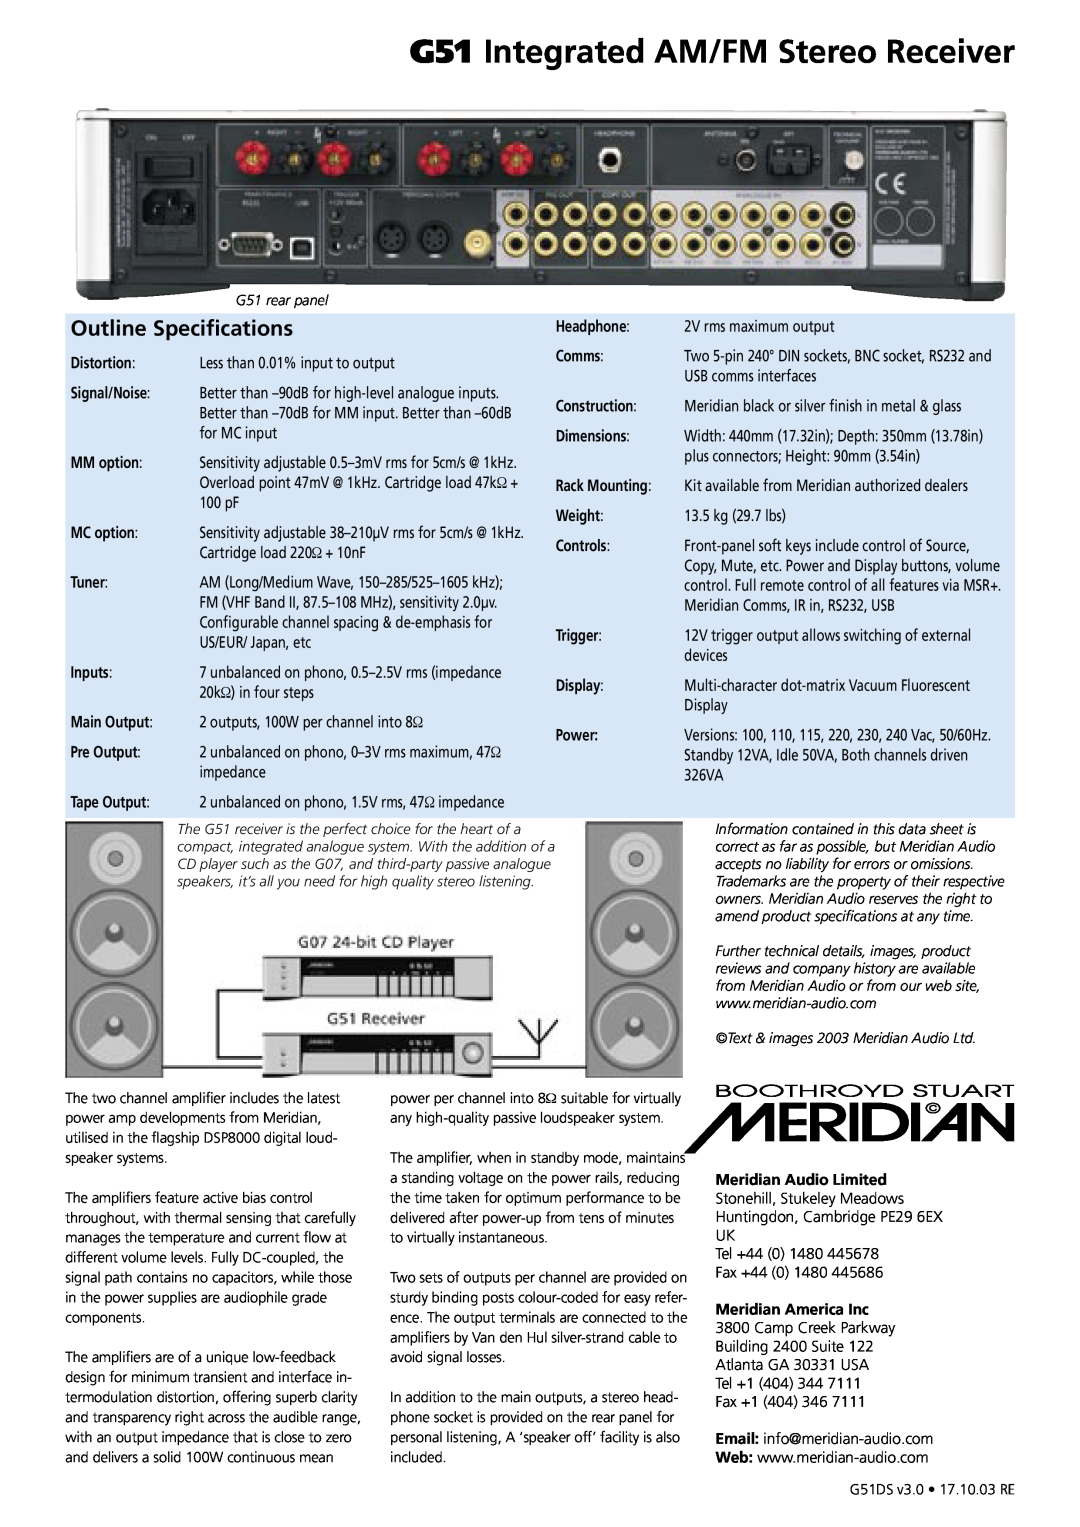 Meridian Audio manual Outline Specifications, G51 Integrated AM/FM Stereo Receiver, Power 